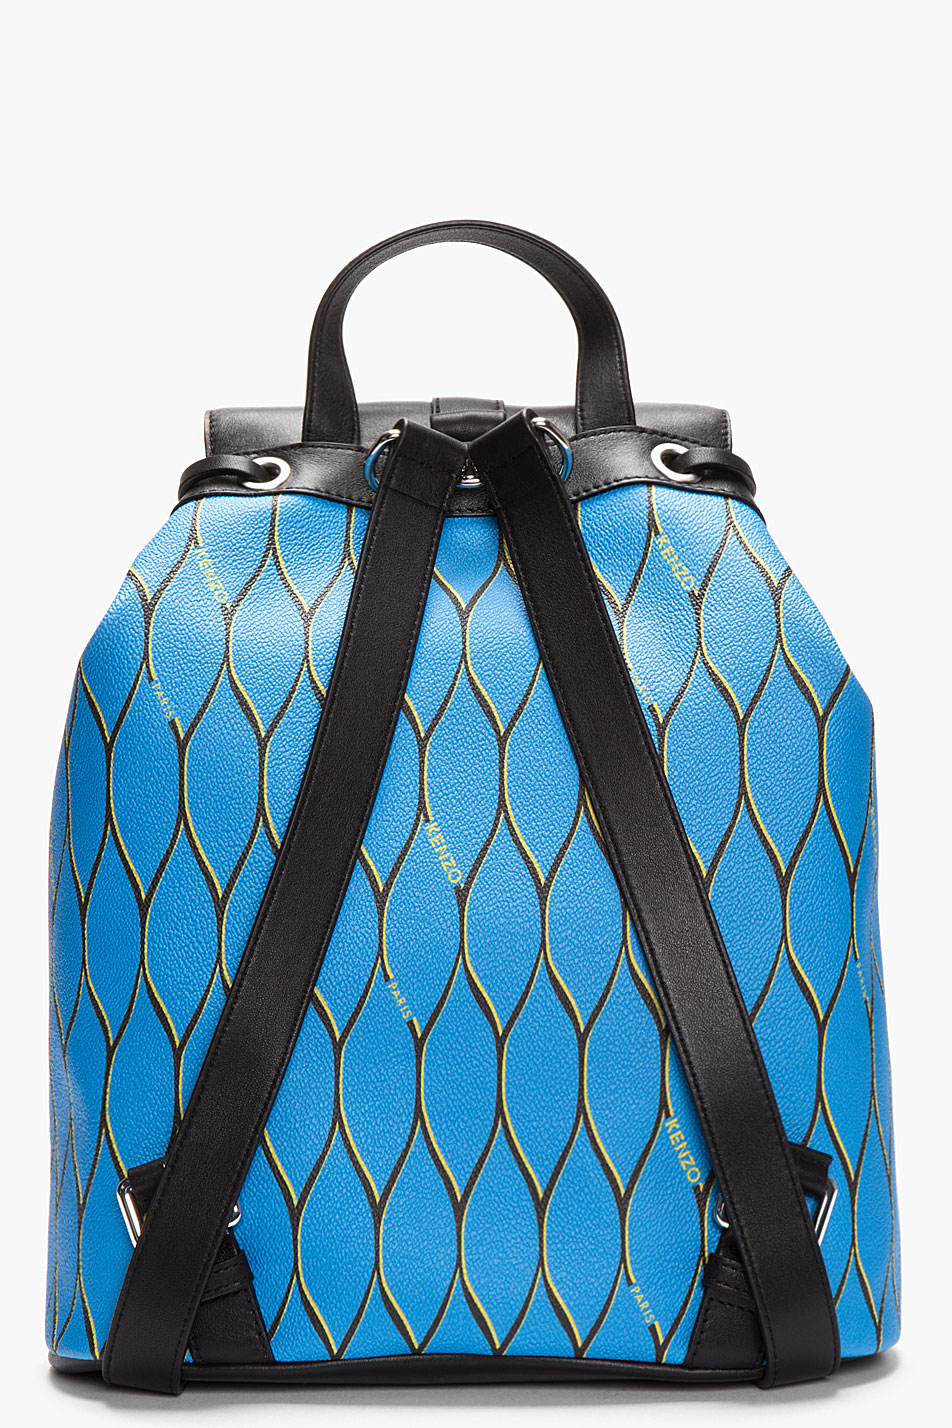 Kenzo Blue Leather Patterned Back Pack in Blue | Lyst